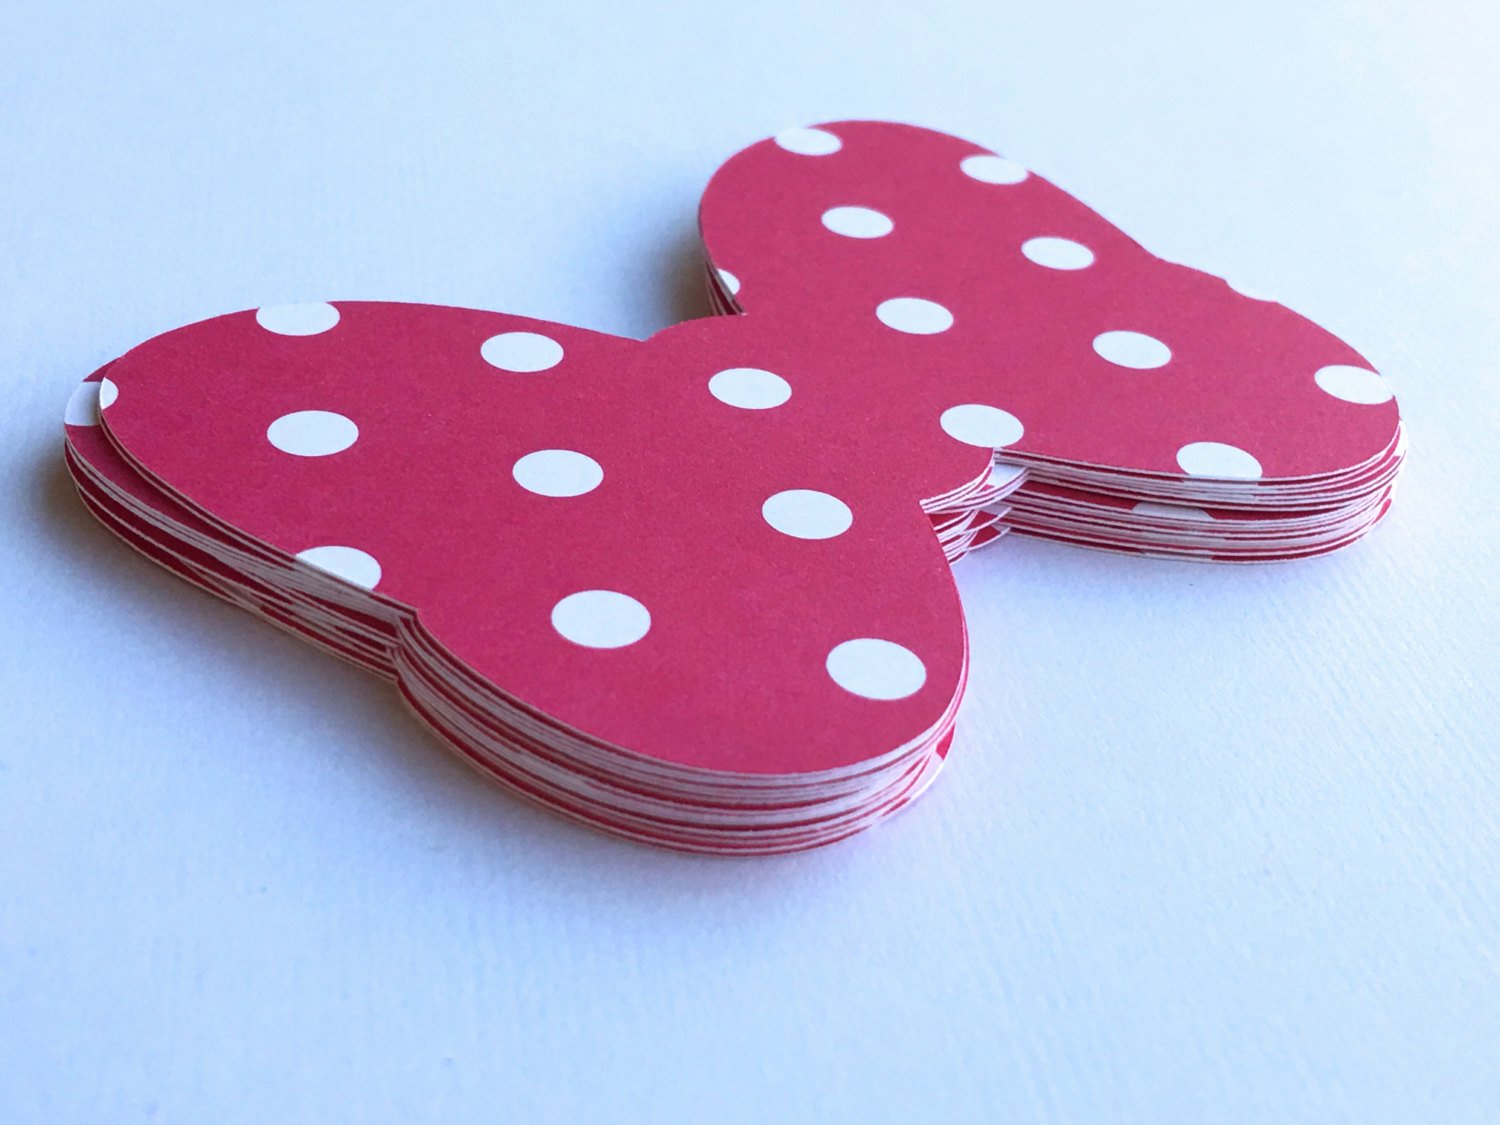 Pink Minnie Mouse Bow Beautiful Minnie Mouse Bows Pink and White Polka Dot Bows Red Polka